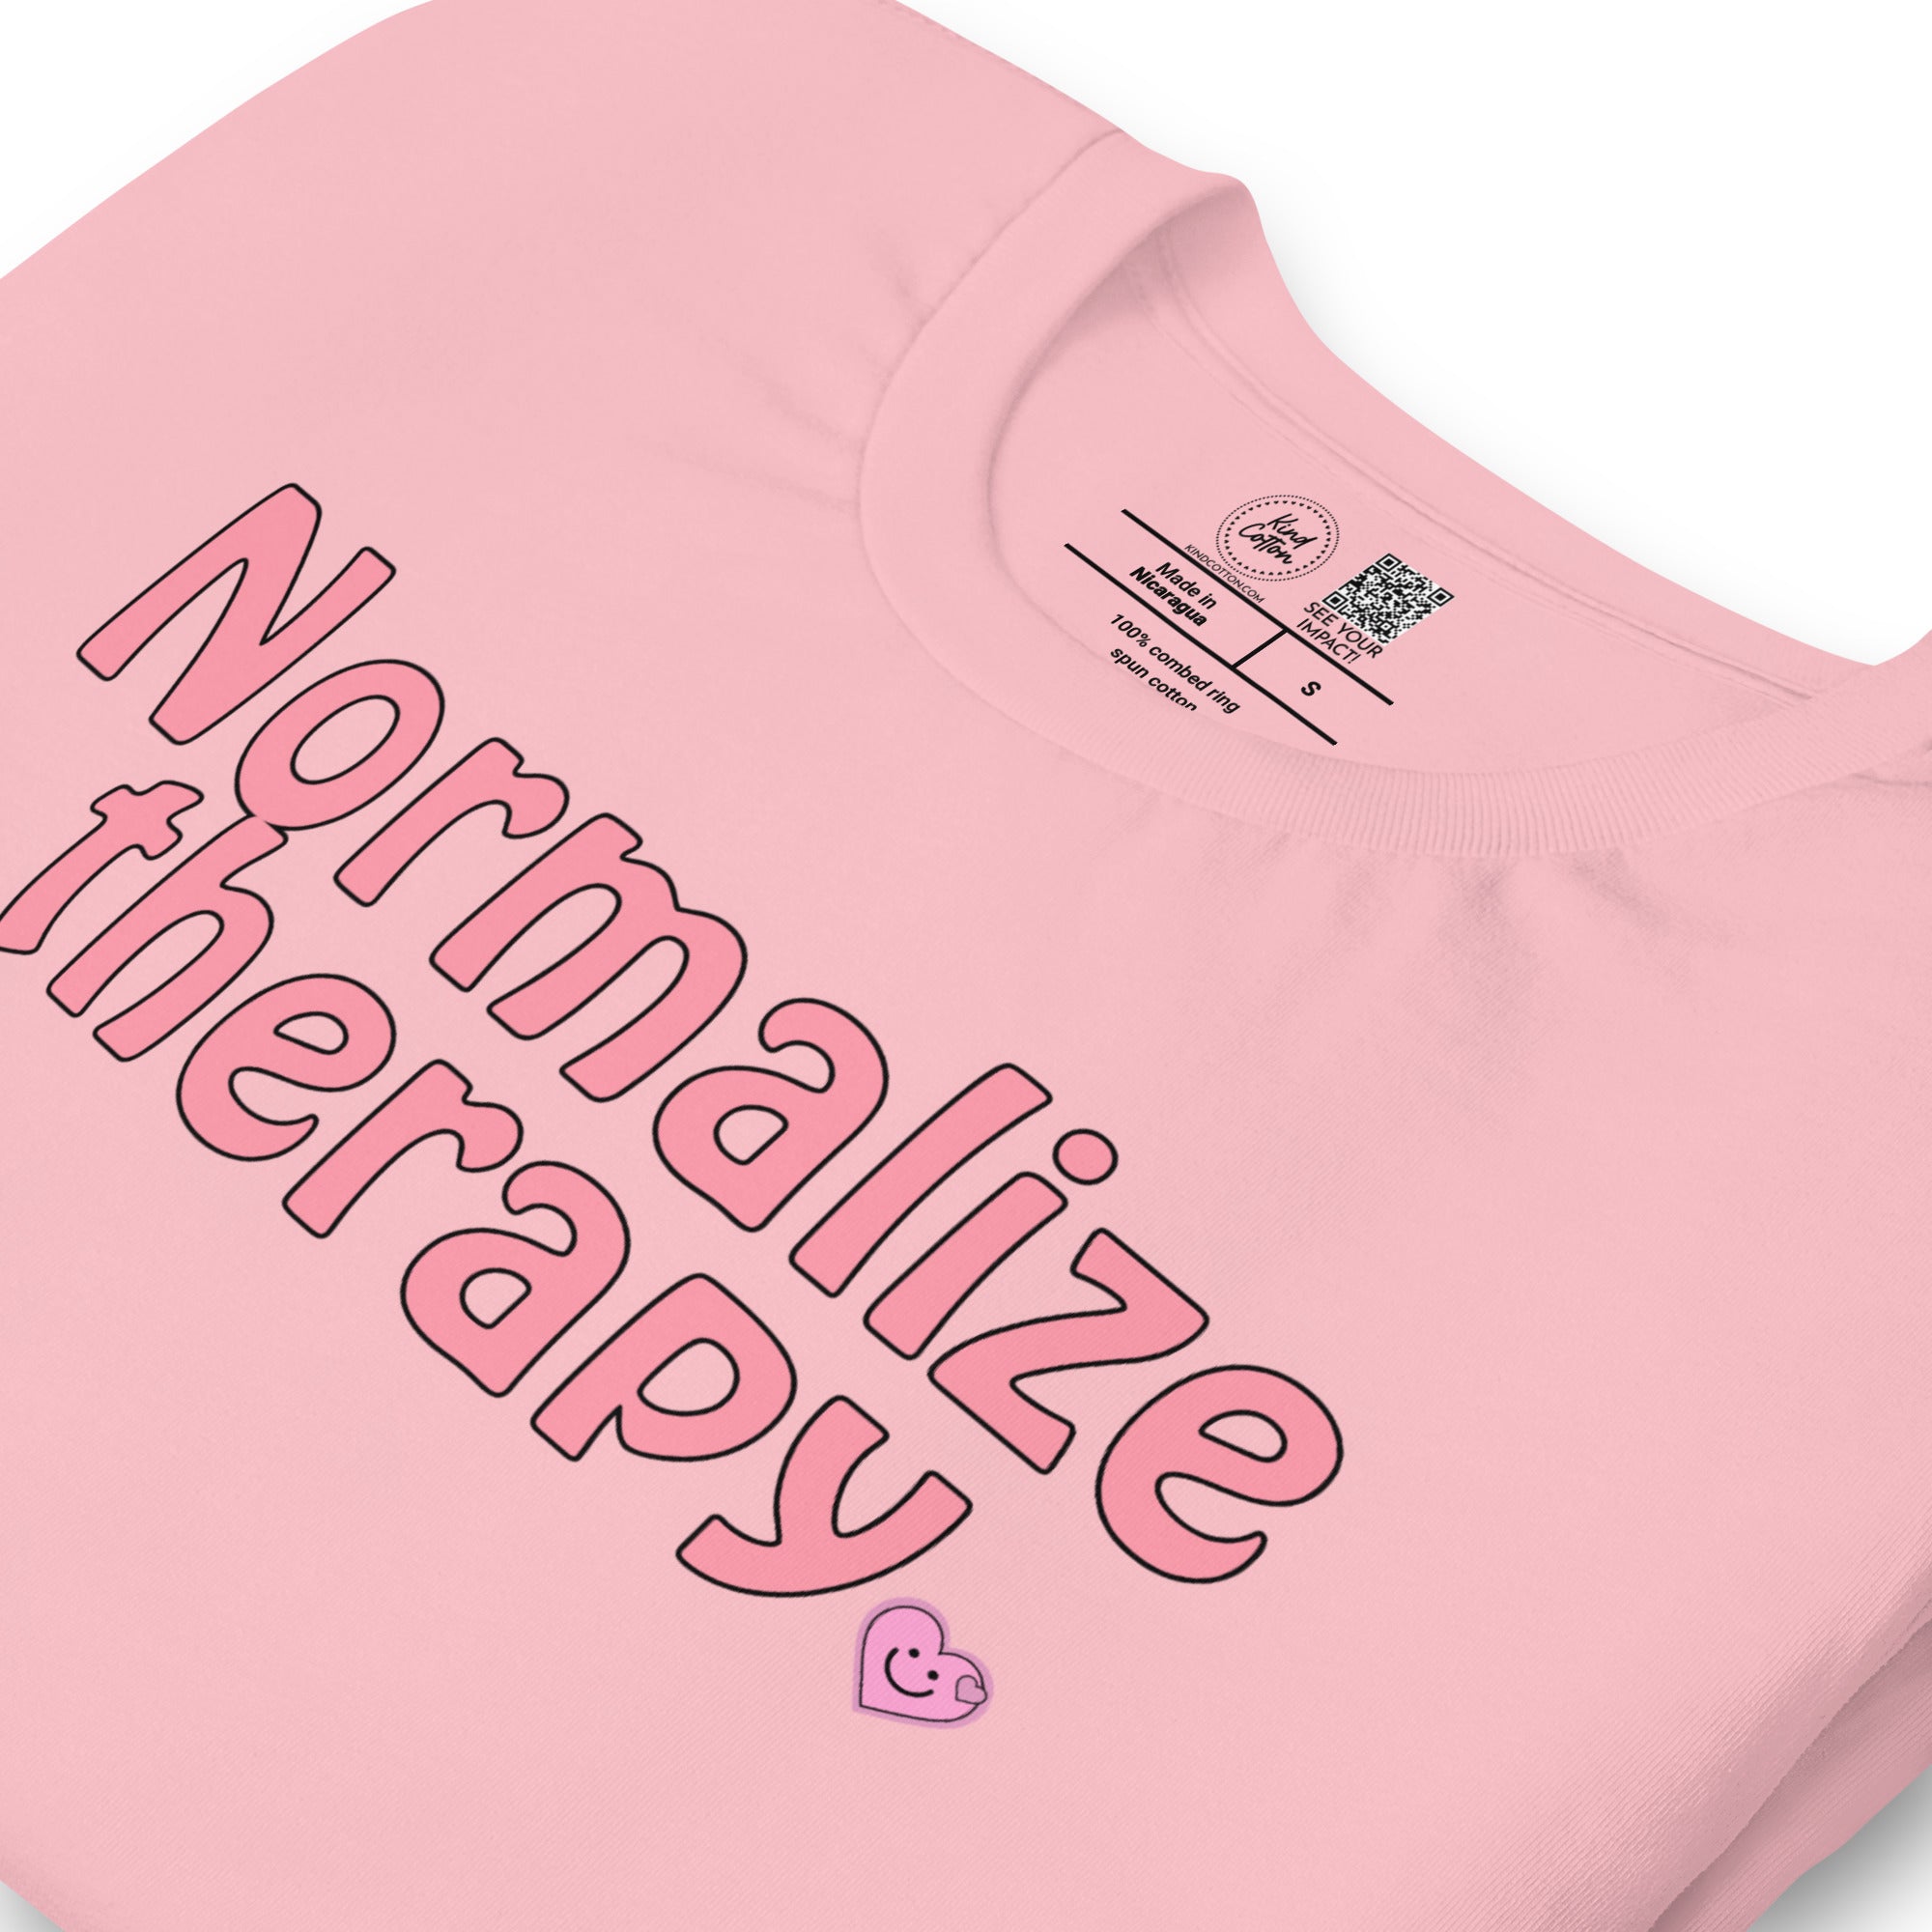 Normalize Therapy Classic Tee